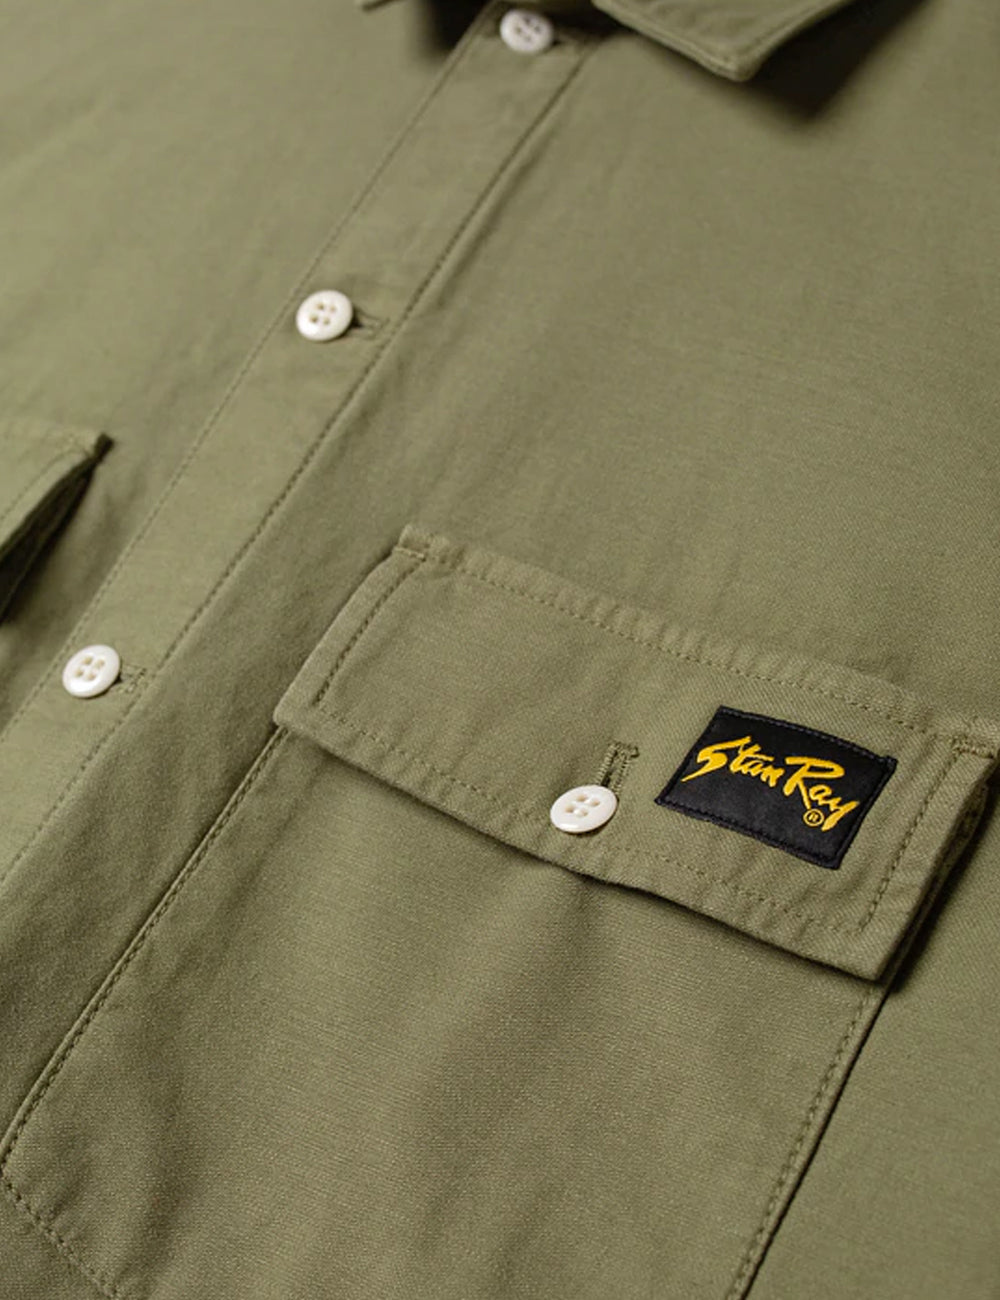 Stan Ray CPO Shirt - Olive Green | URBAN EXCESS.